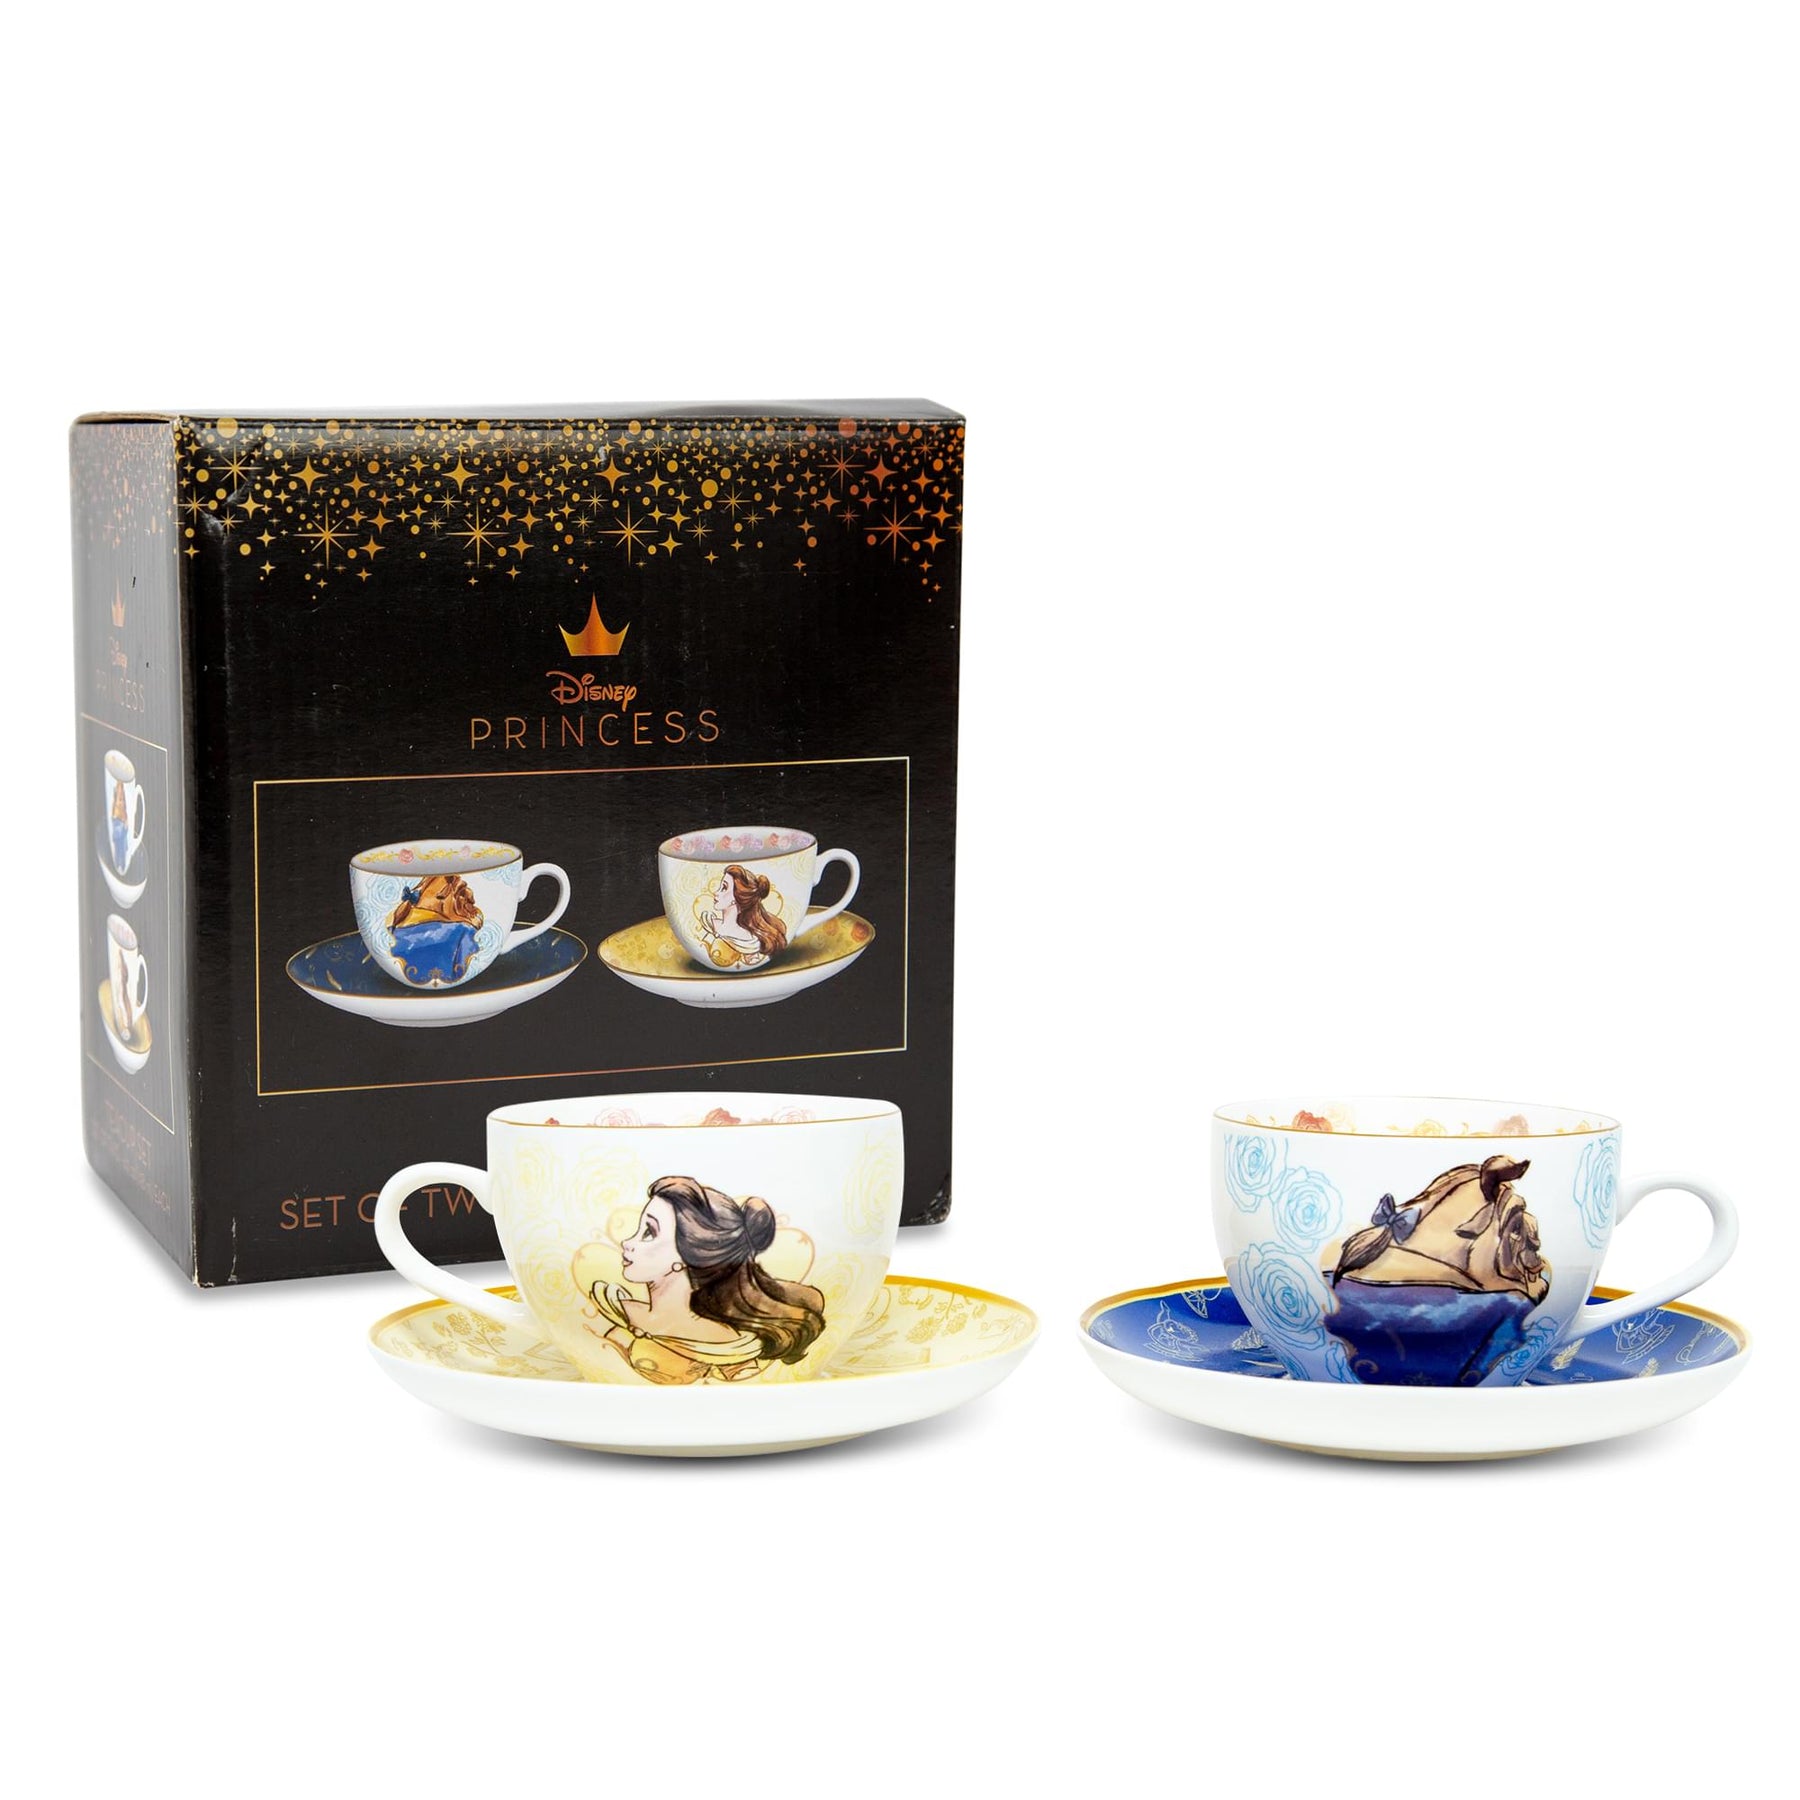 Disney Beauty and the Beast Bone China Teacup and Saucer | Set of 2